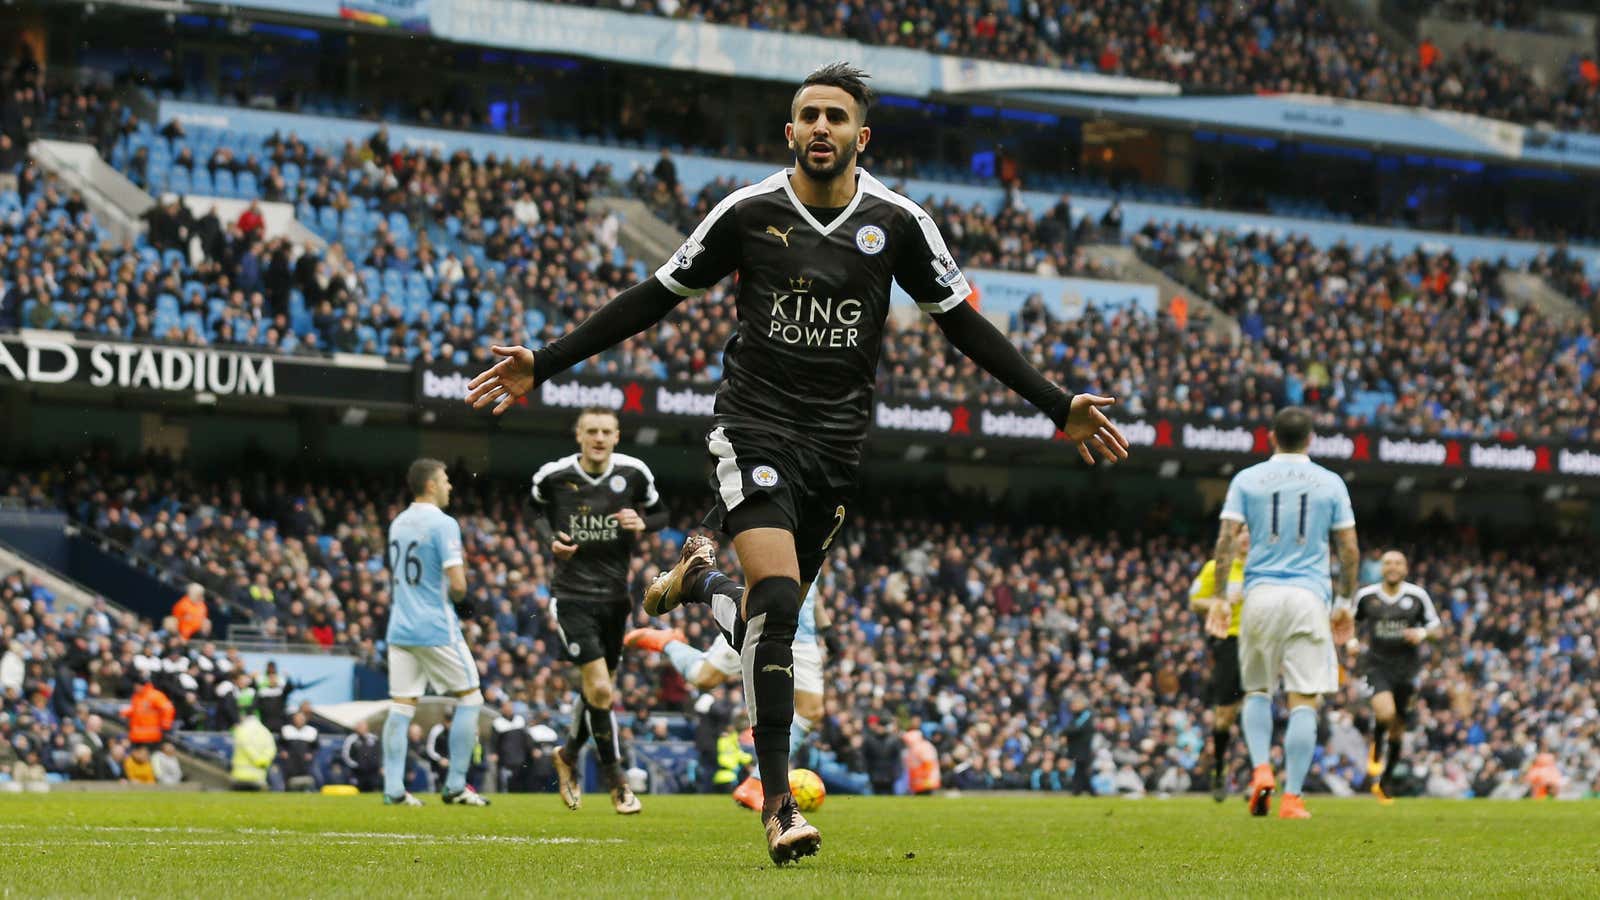 The success of players like Leicester City’s Algerian player Riyad Mahrez has boosted the premier league’s popularity among Africans.